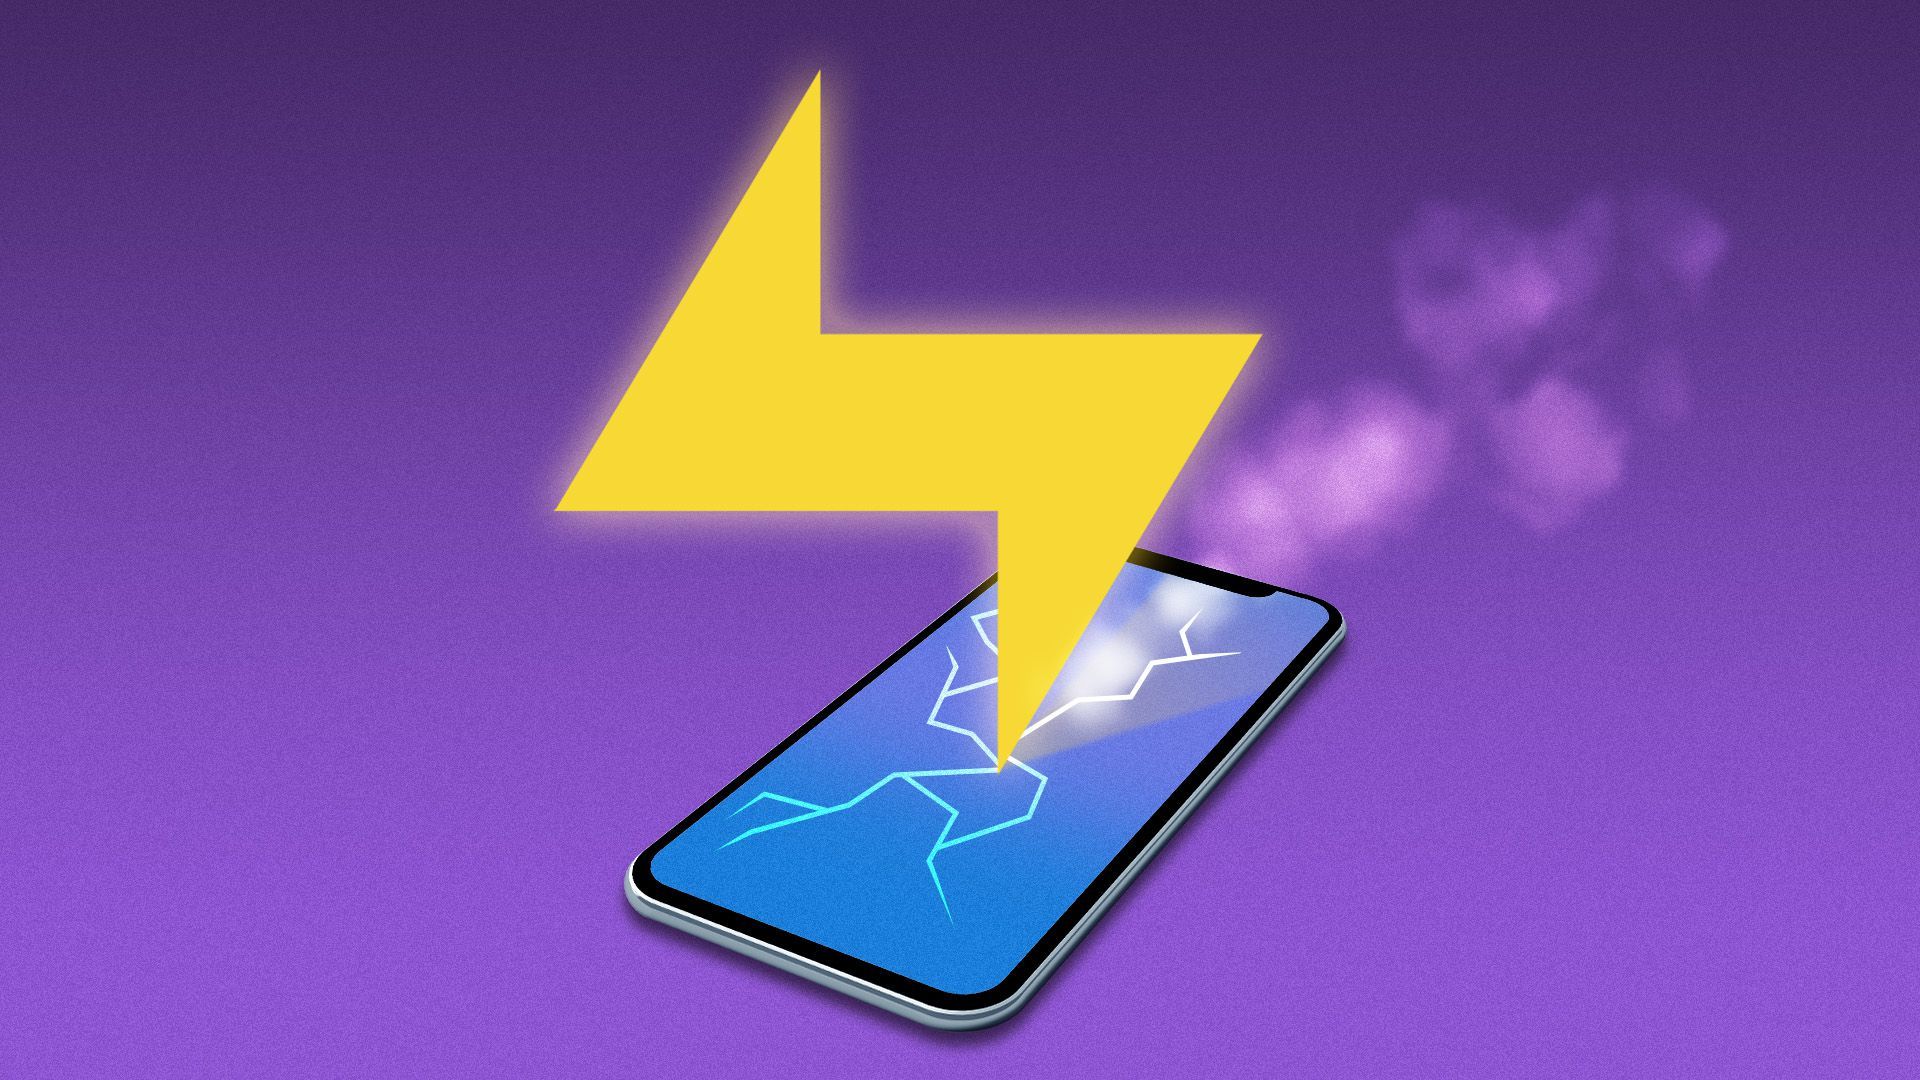 Illustration of the bolt logo striking and breaking a cellphone